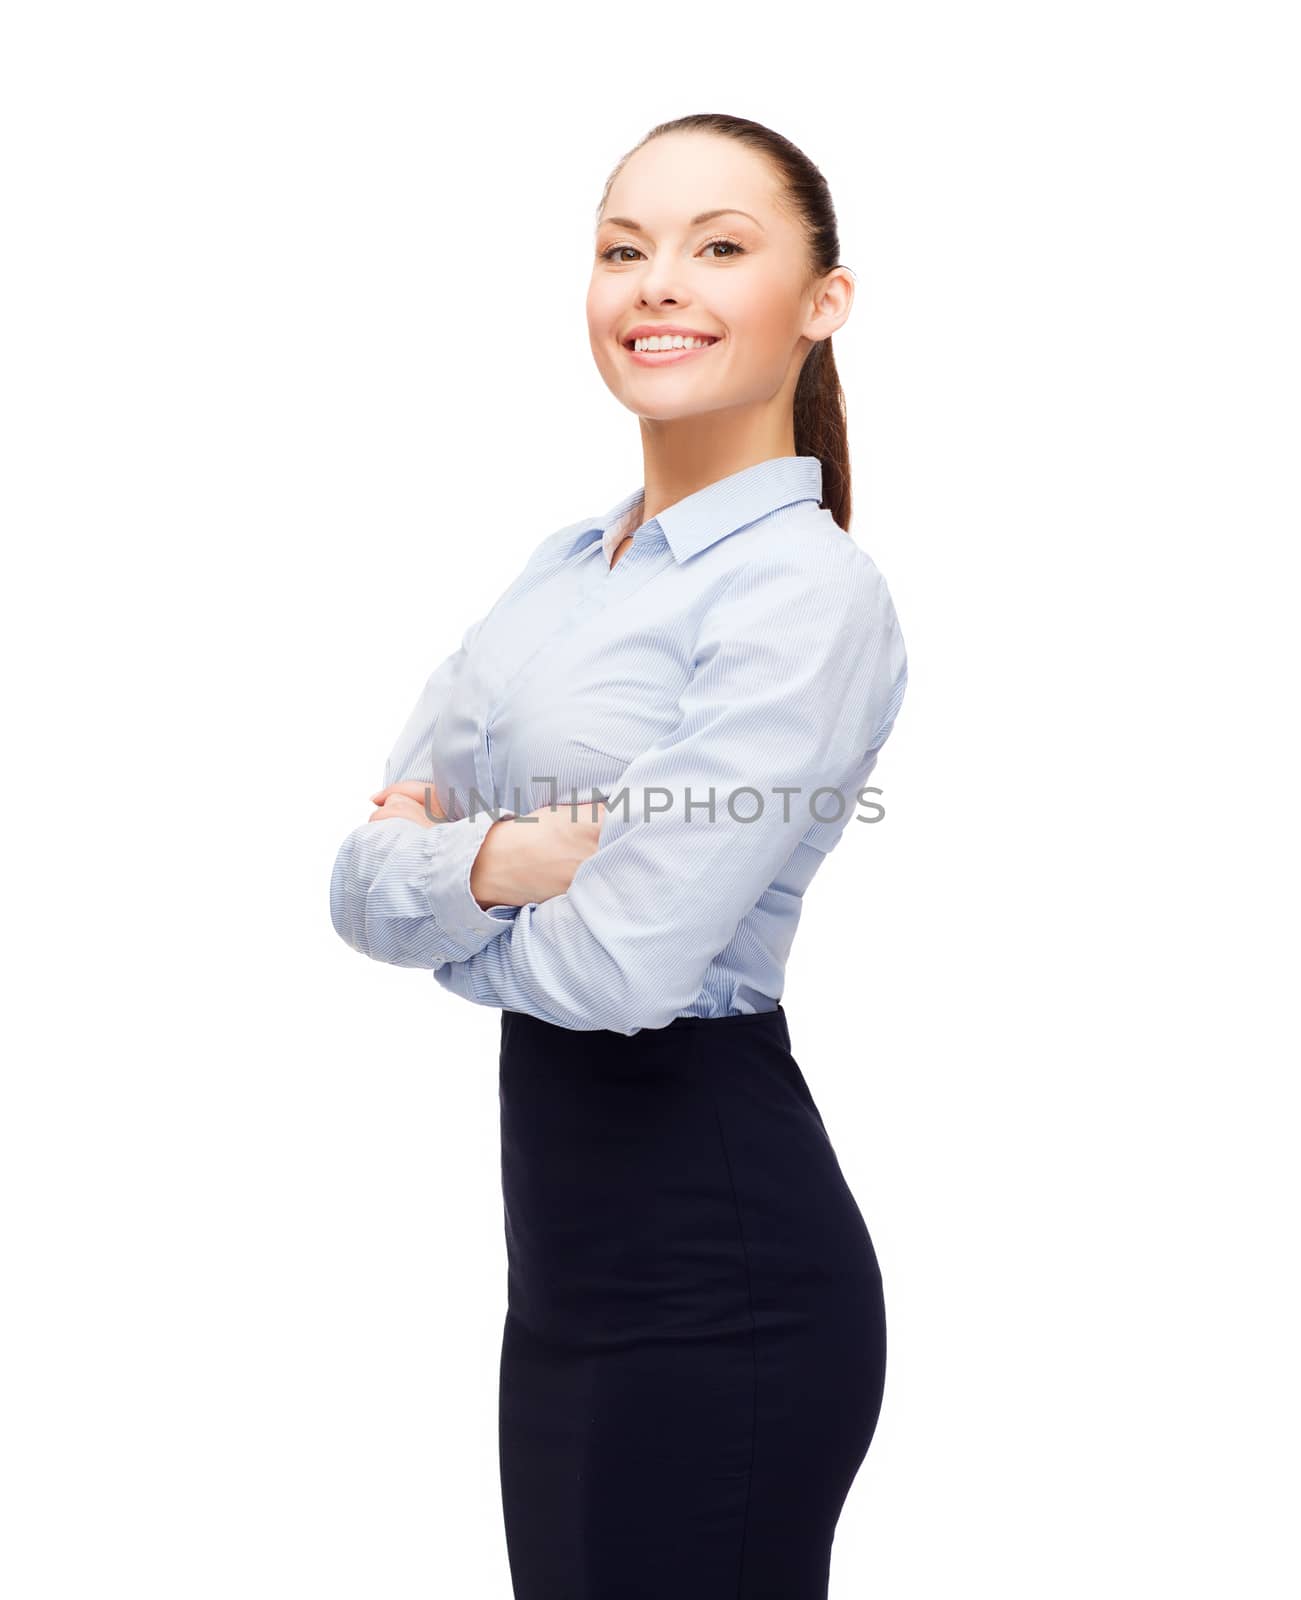 young smiling businesswoman with crossed arms by dolgachov